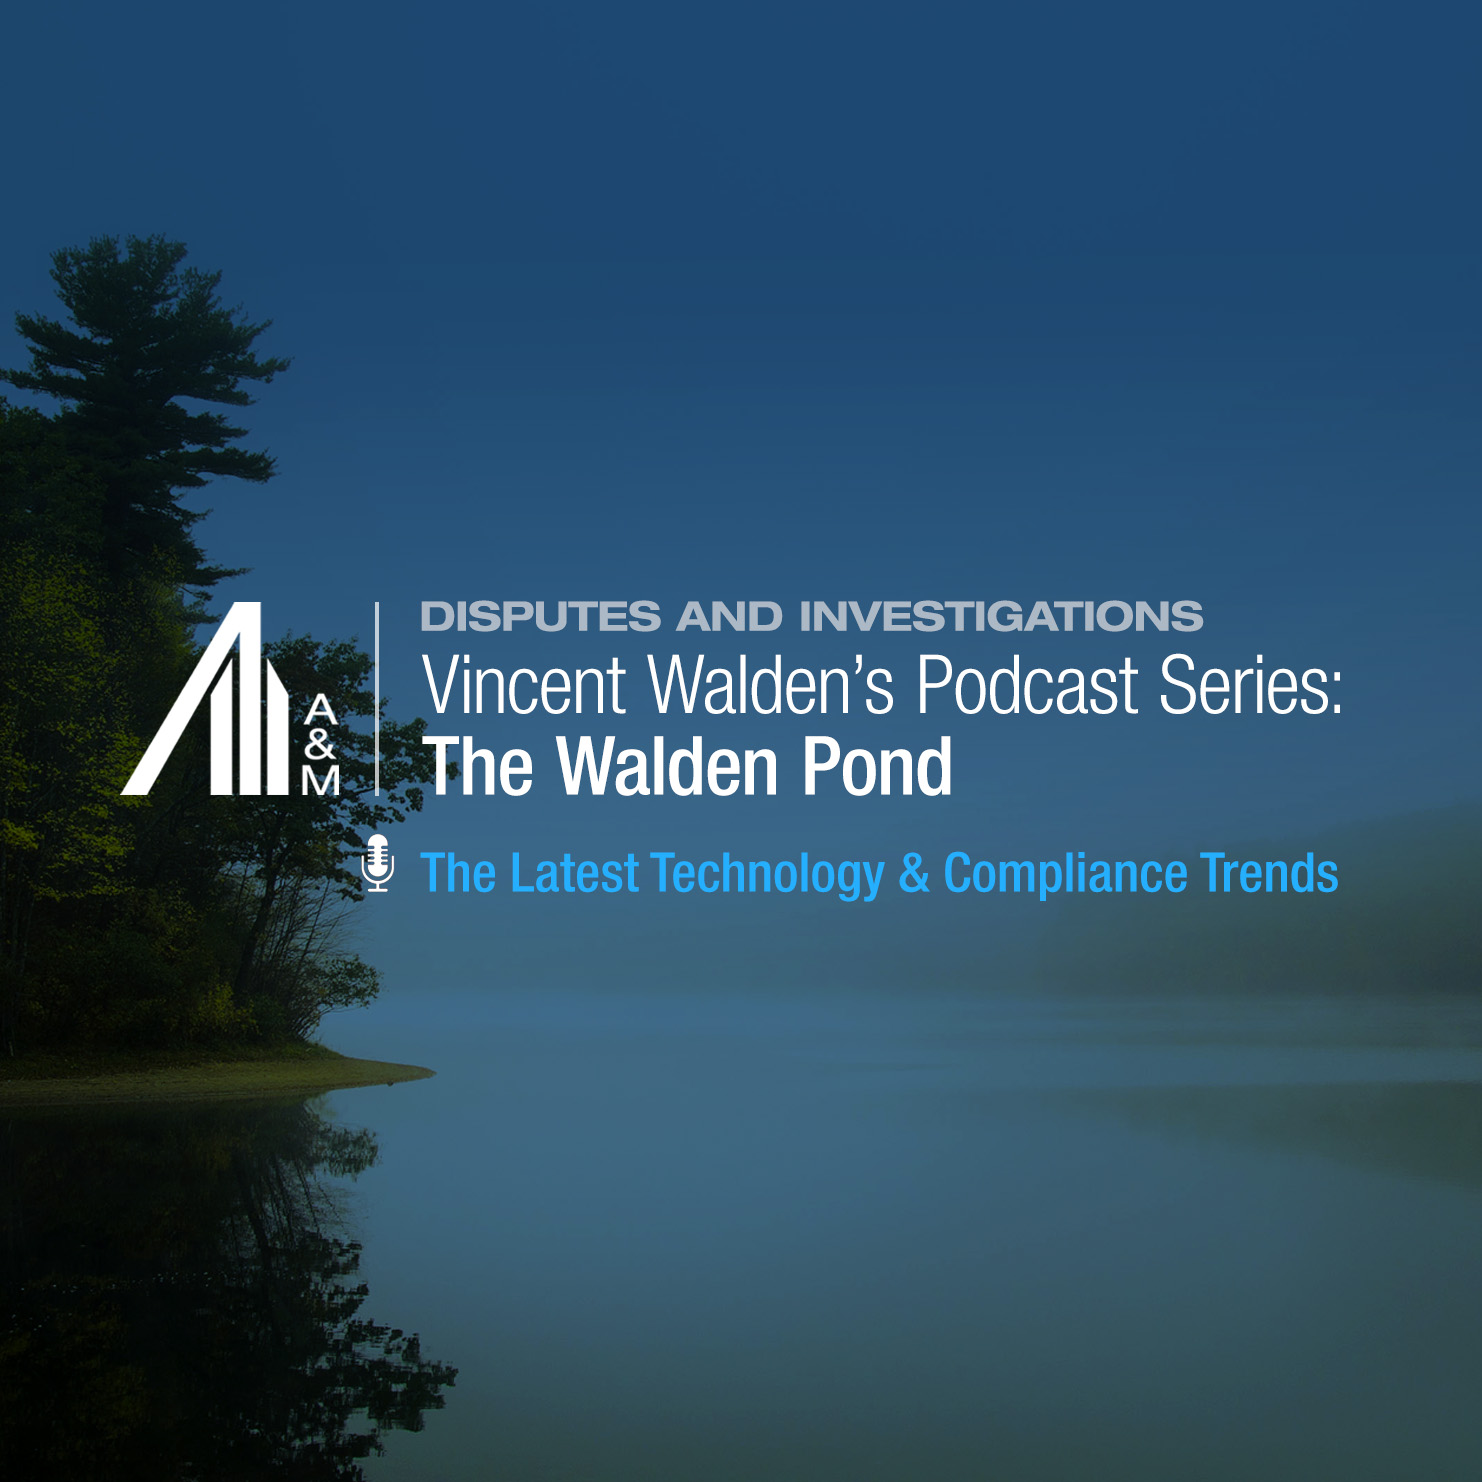 Walden Pond Podcast: Anti-Corruption Trends and Compliance in Brazil